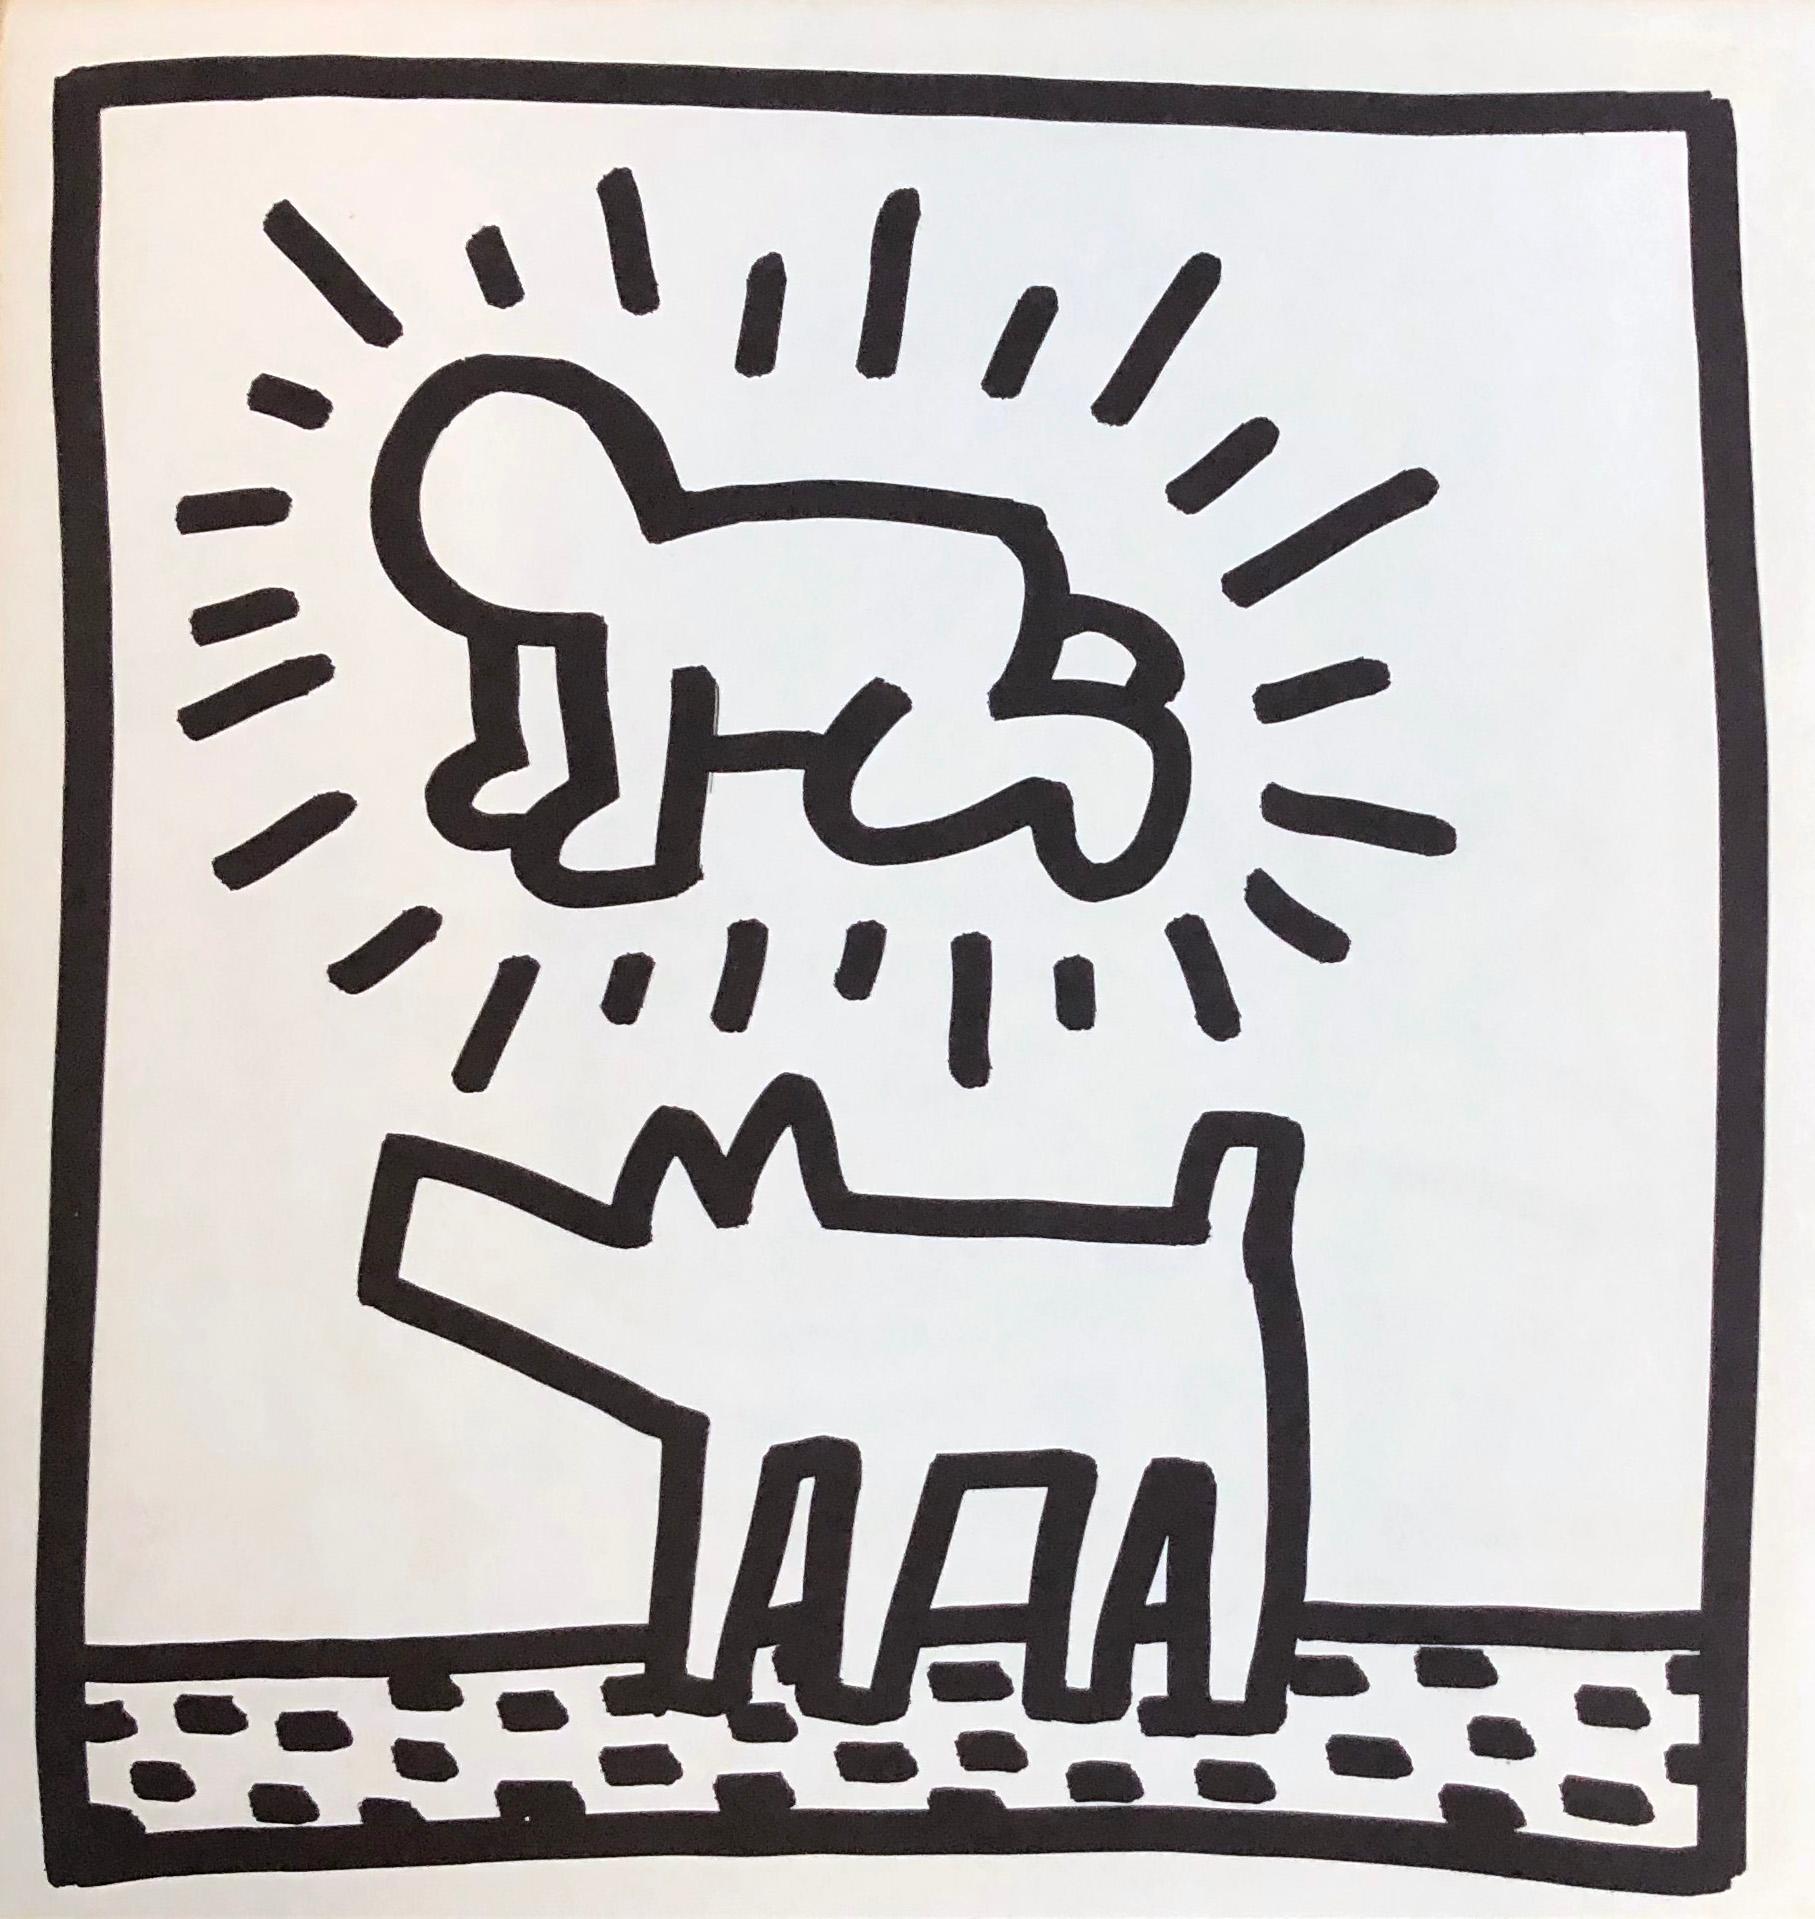 Keith Haring Tony Shafrazi Lithograph 1982
Double-sided offset lithograph published by Tony Shafrazi Gallery, New York, 1982 from an edition of 2000. 

Single sheet lithograph from the seminal spiral bound, early monograph showcasing Haring's work.